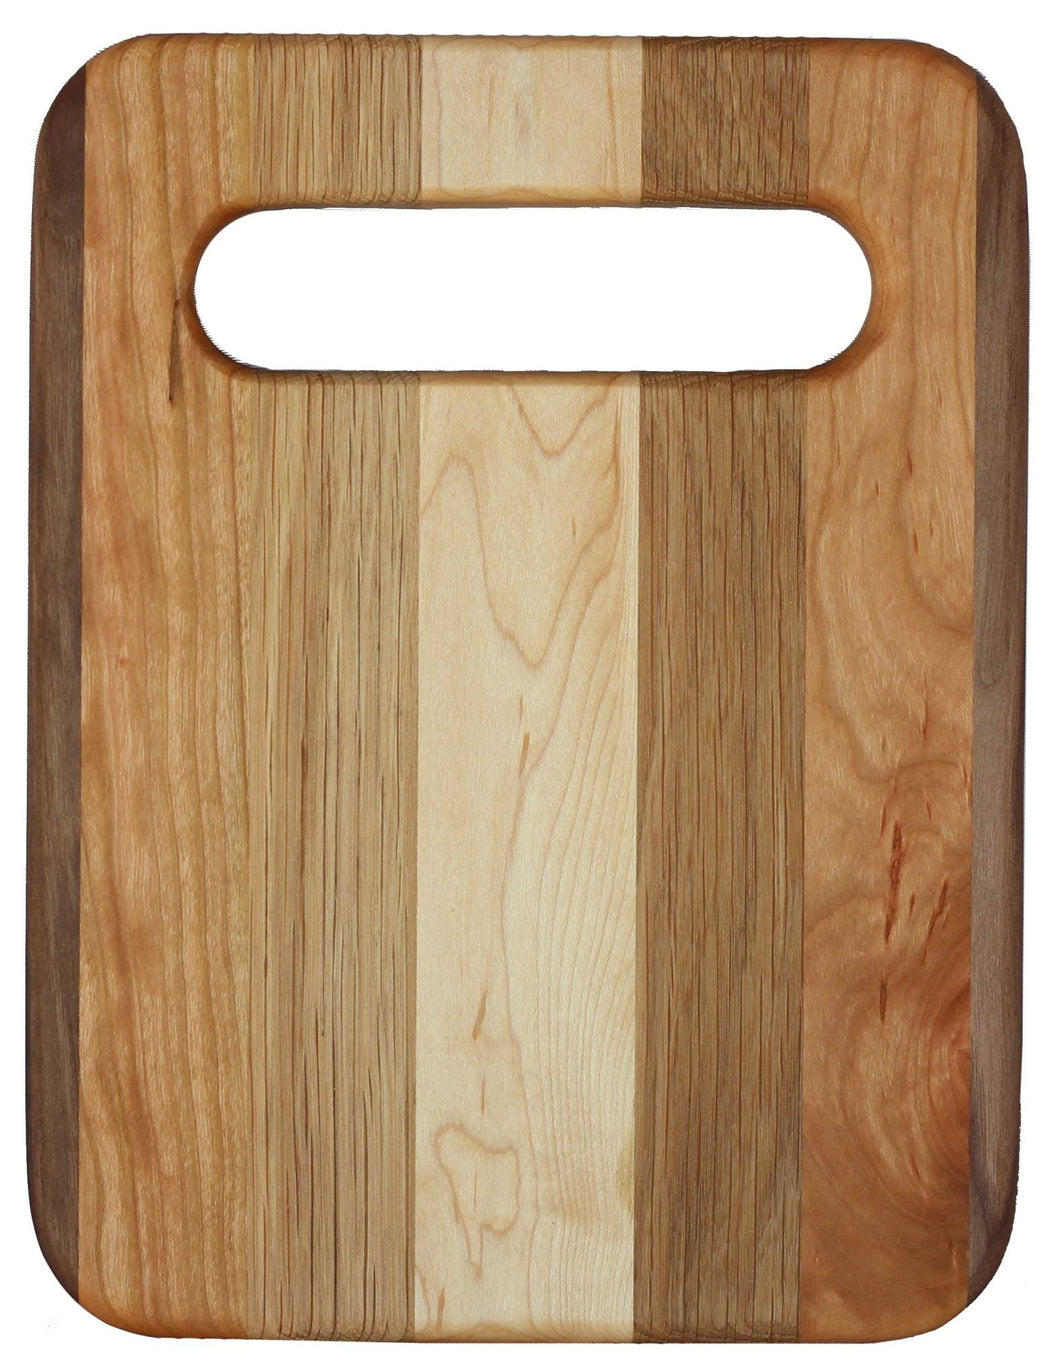 Single Handle Cutting Boards Including Oil Single Handle 14 x 19